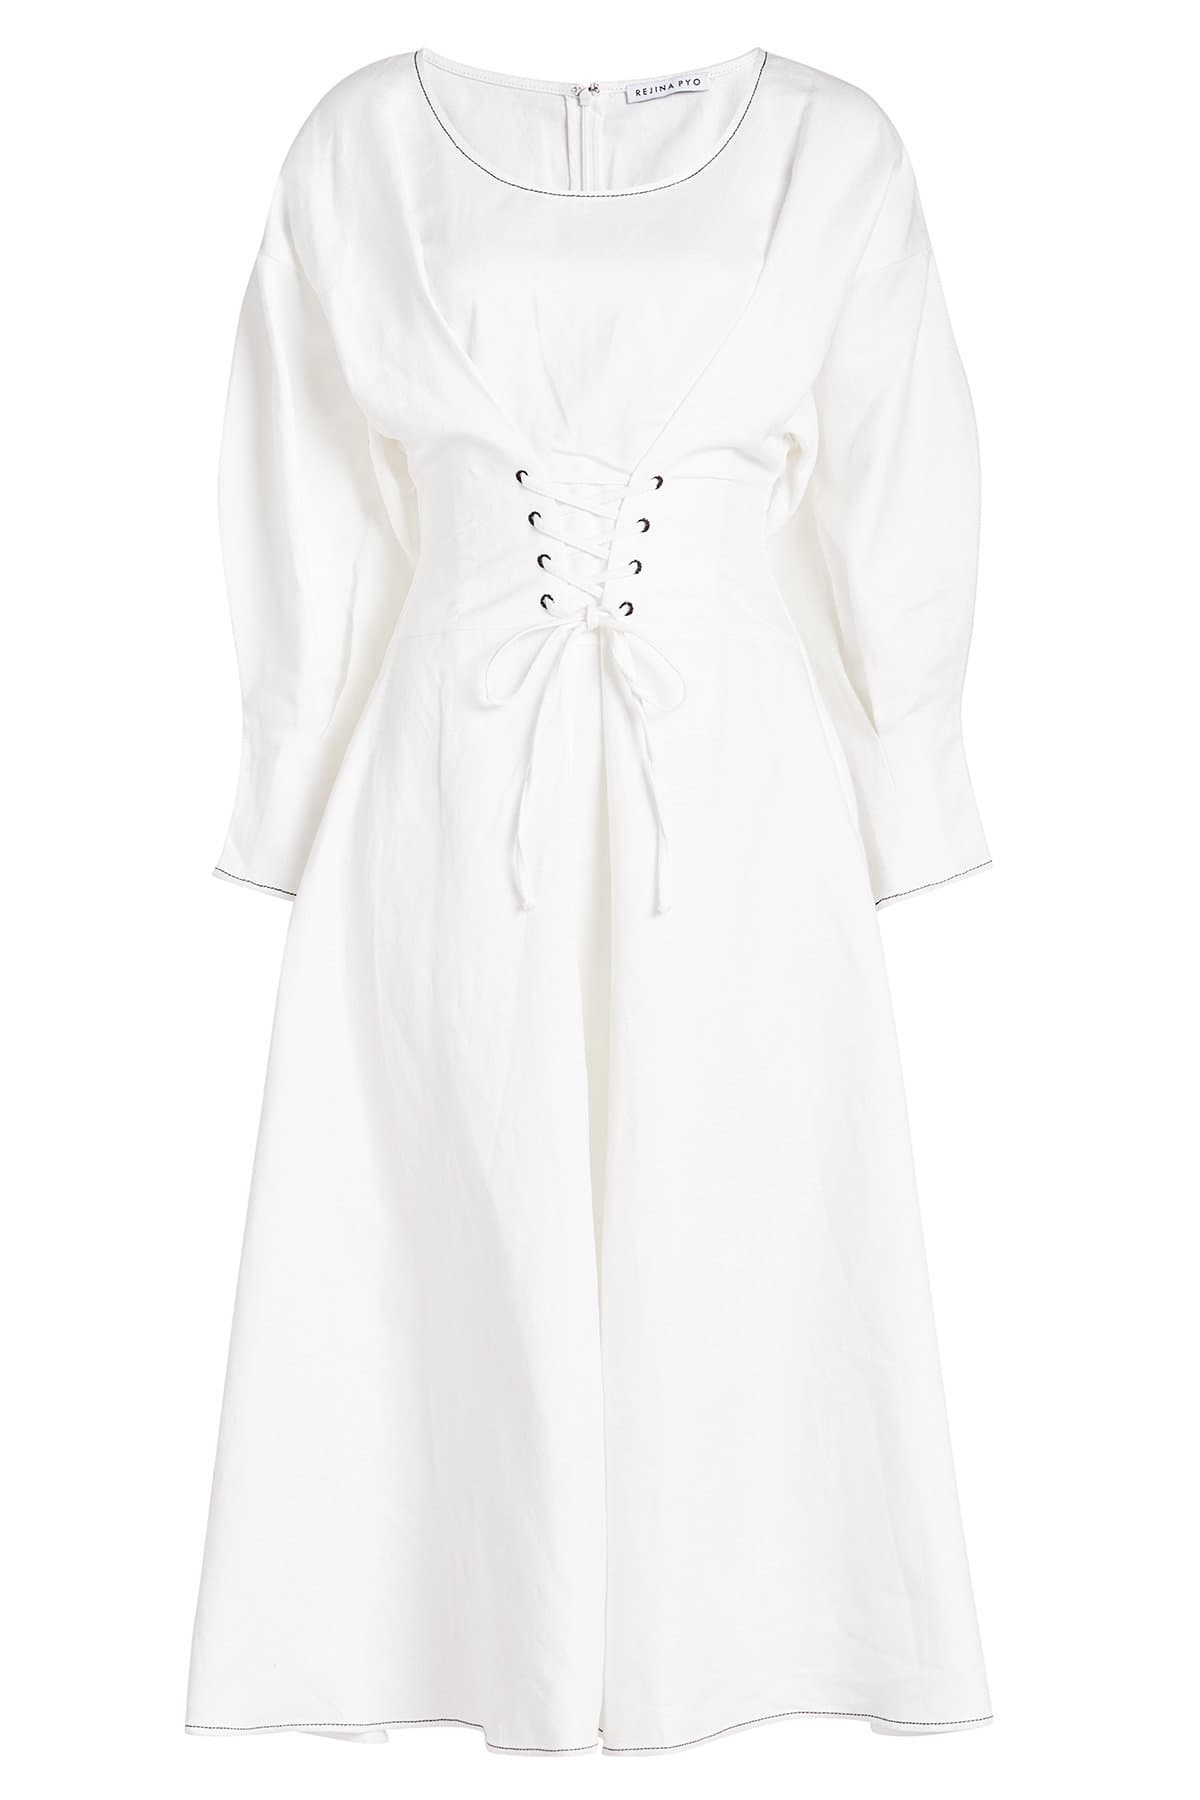 Rejina Pyo - Irene Linen-Cotton Dress with Lace-Up Detail